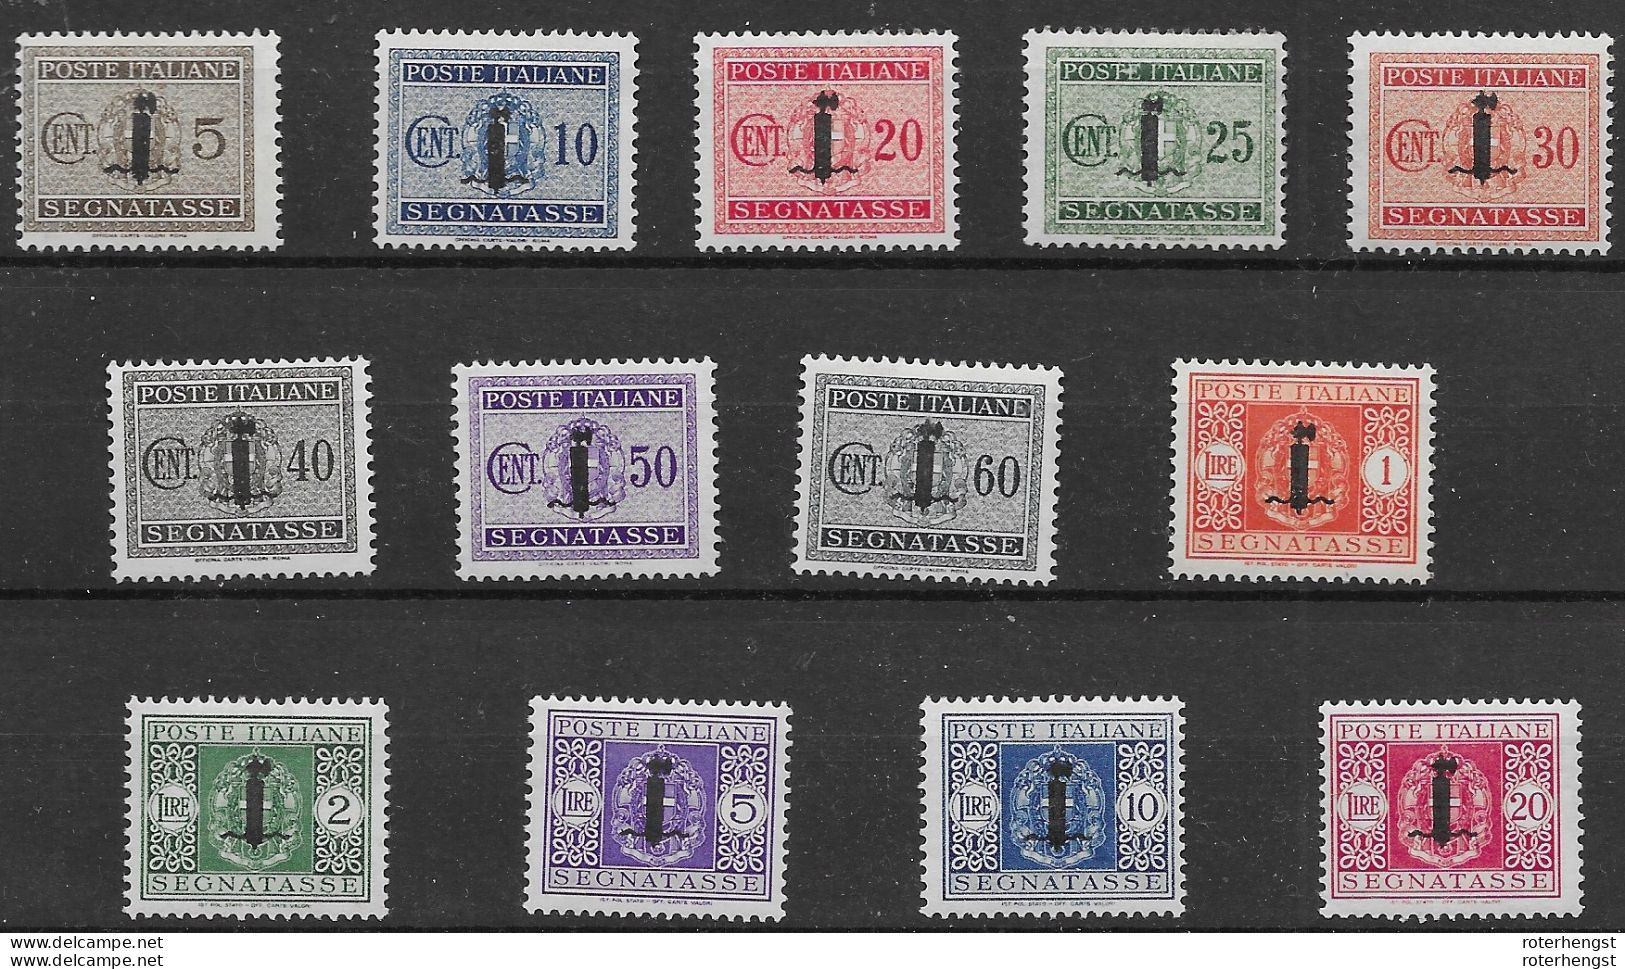 Italiy 1944 Mlh * 550 Euros (complete Set) Best Values Very Low Hinge Trace - Strafport